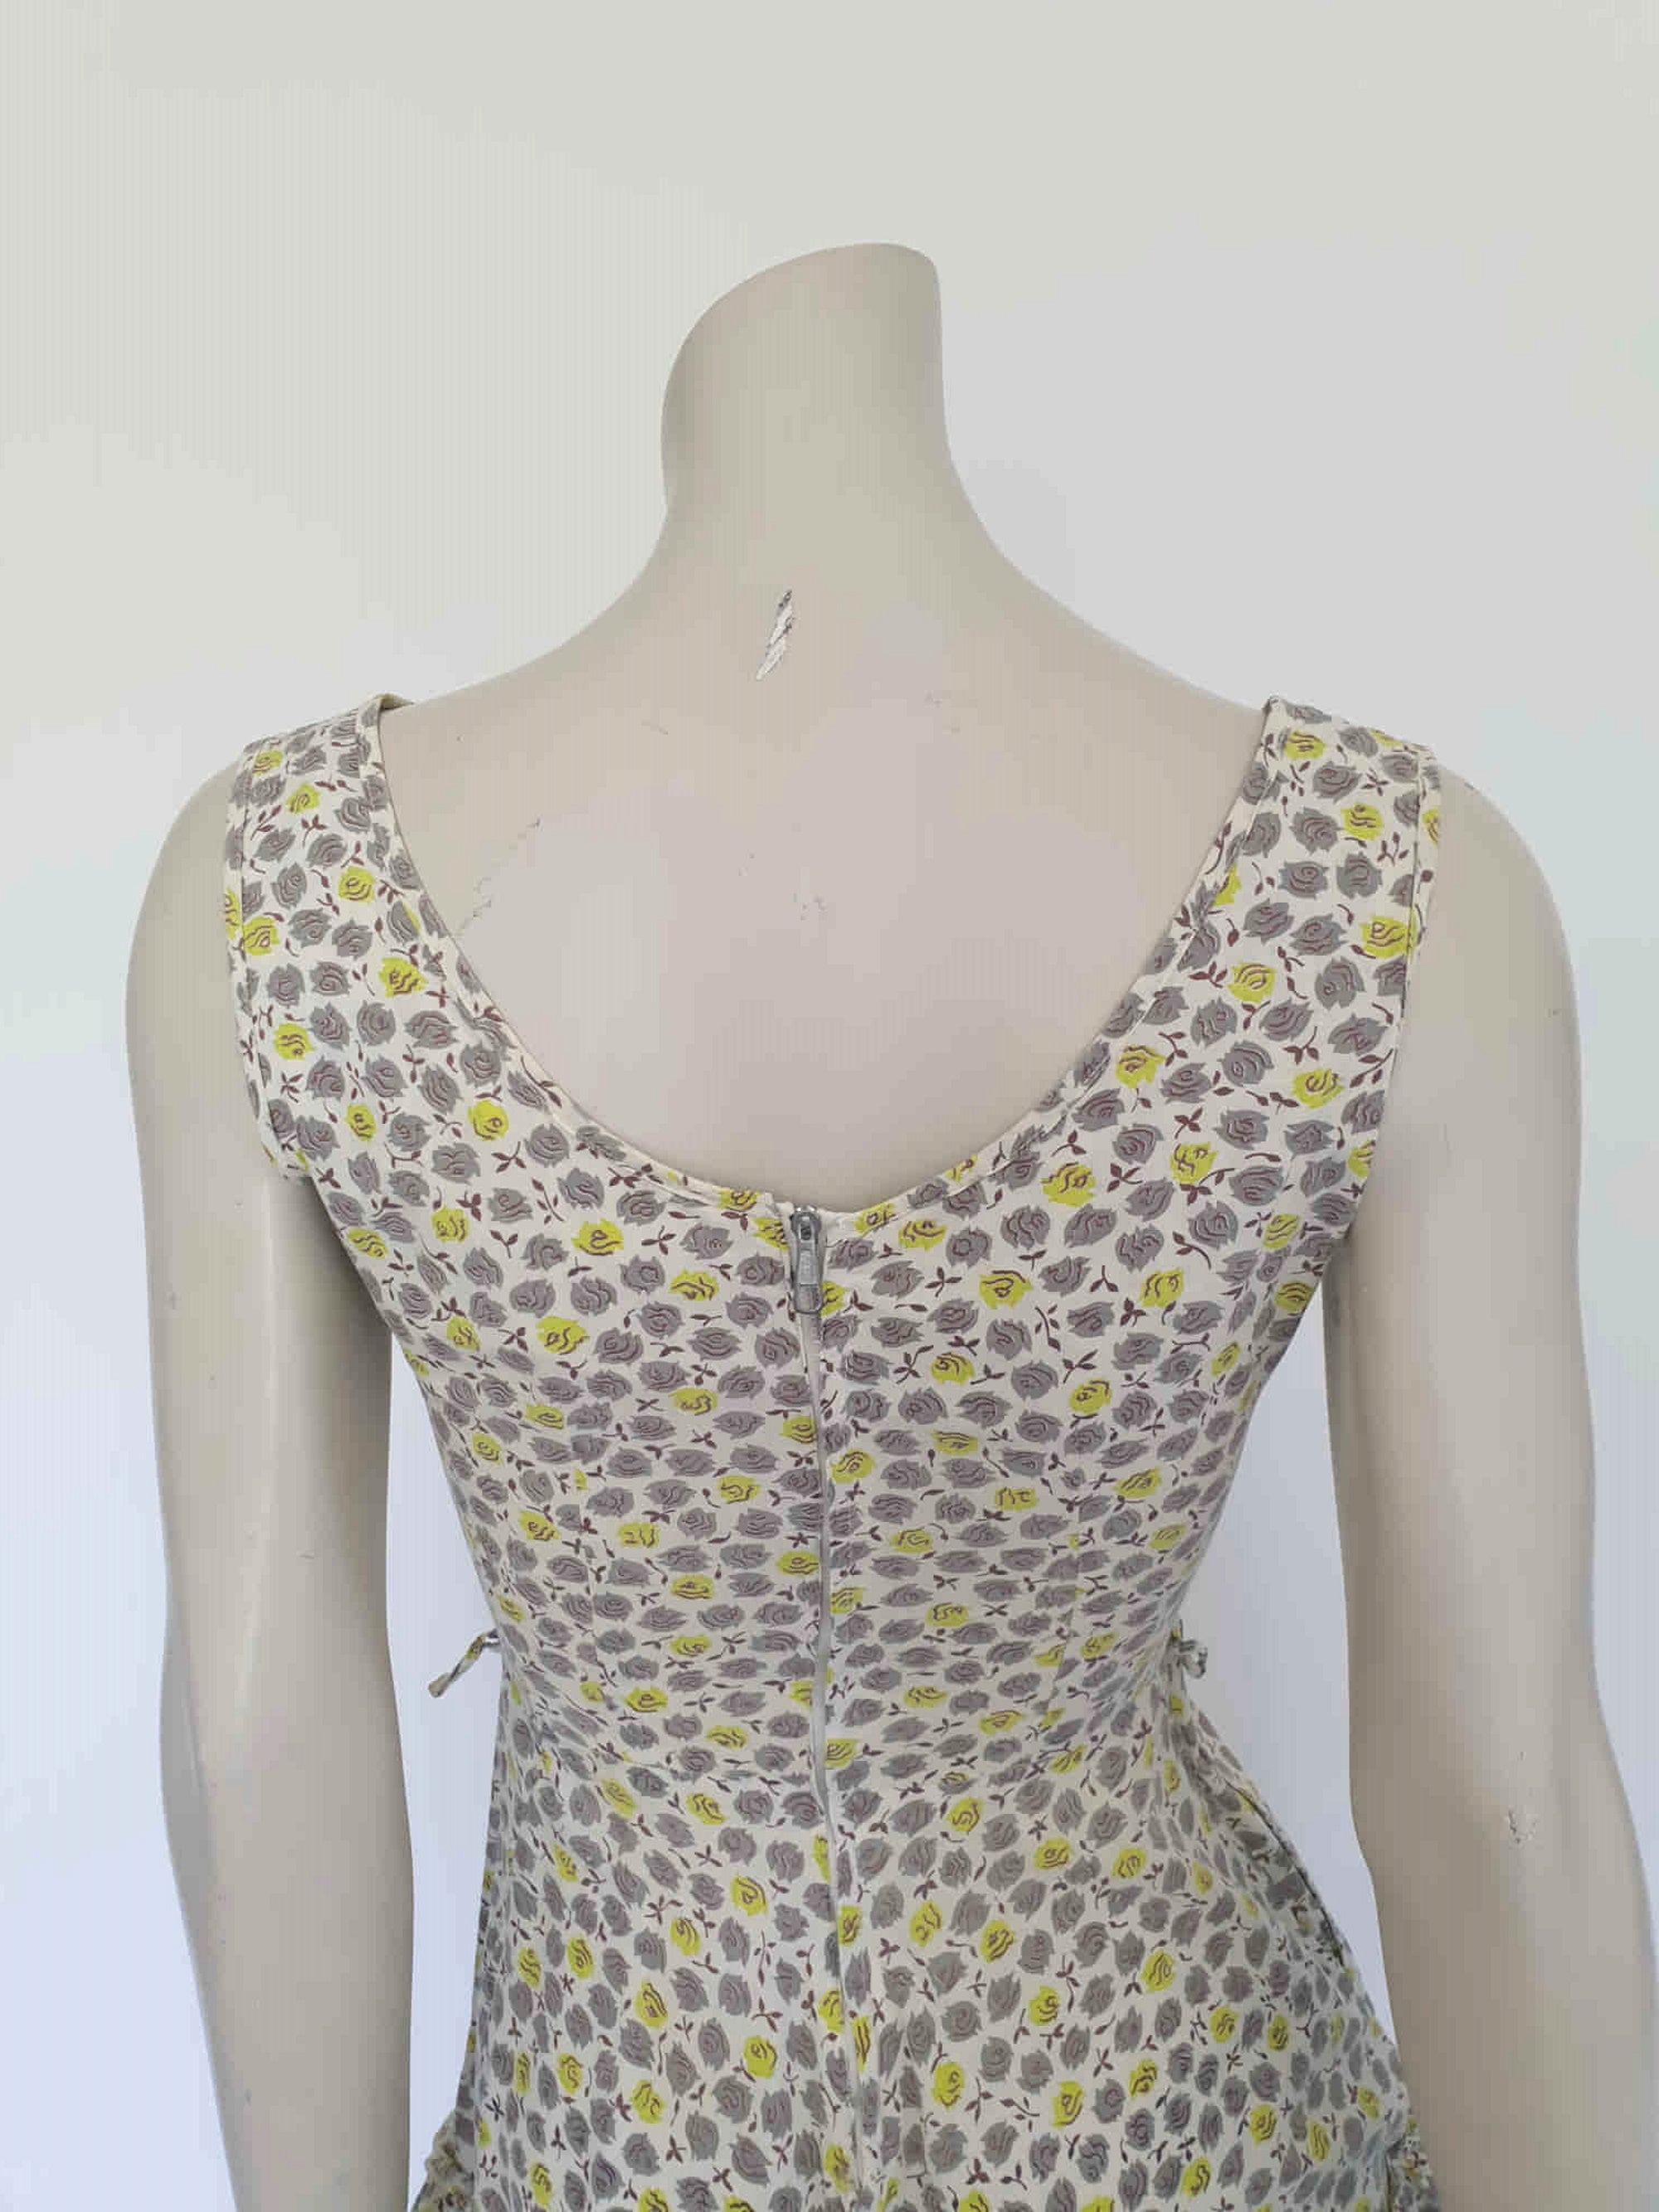 1950s vintage cotton day dress grey and green floral